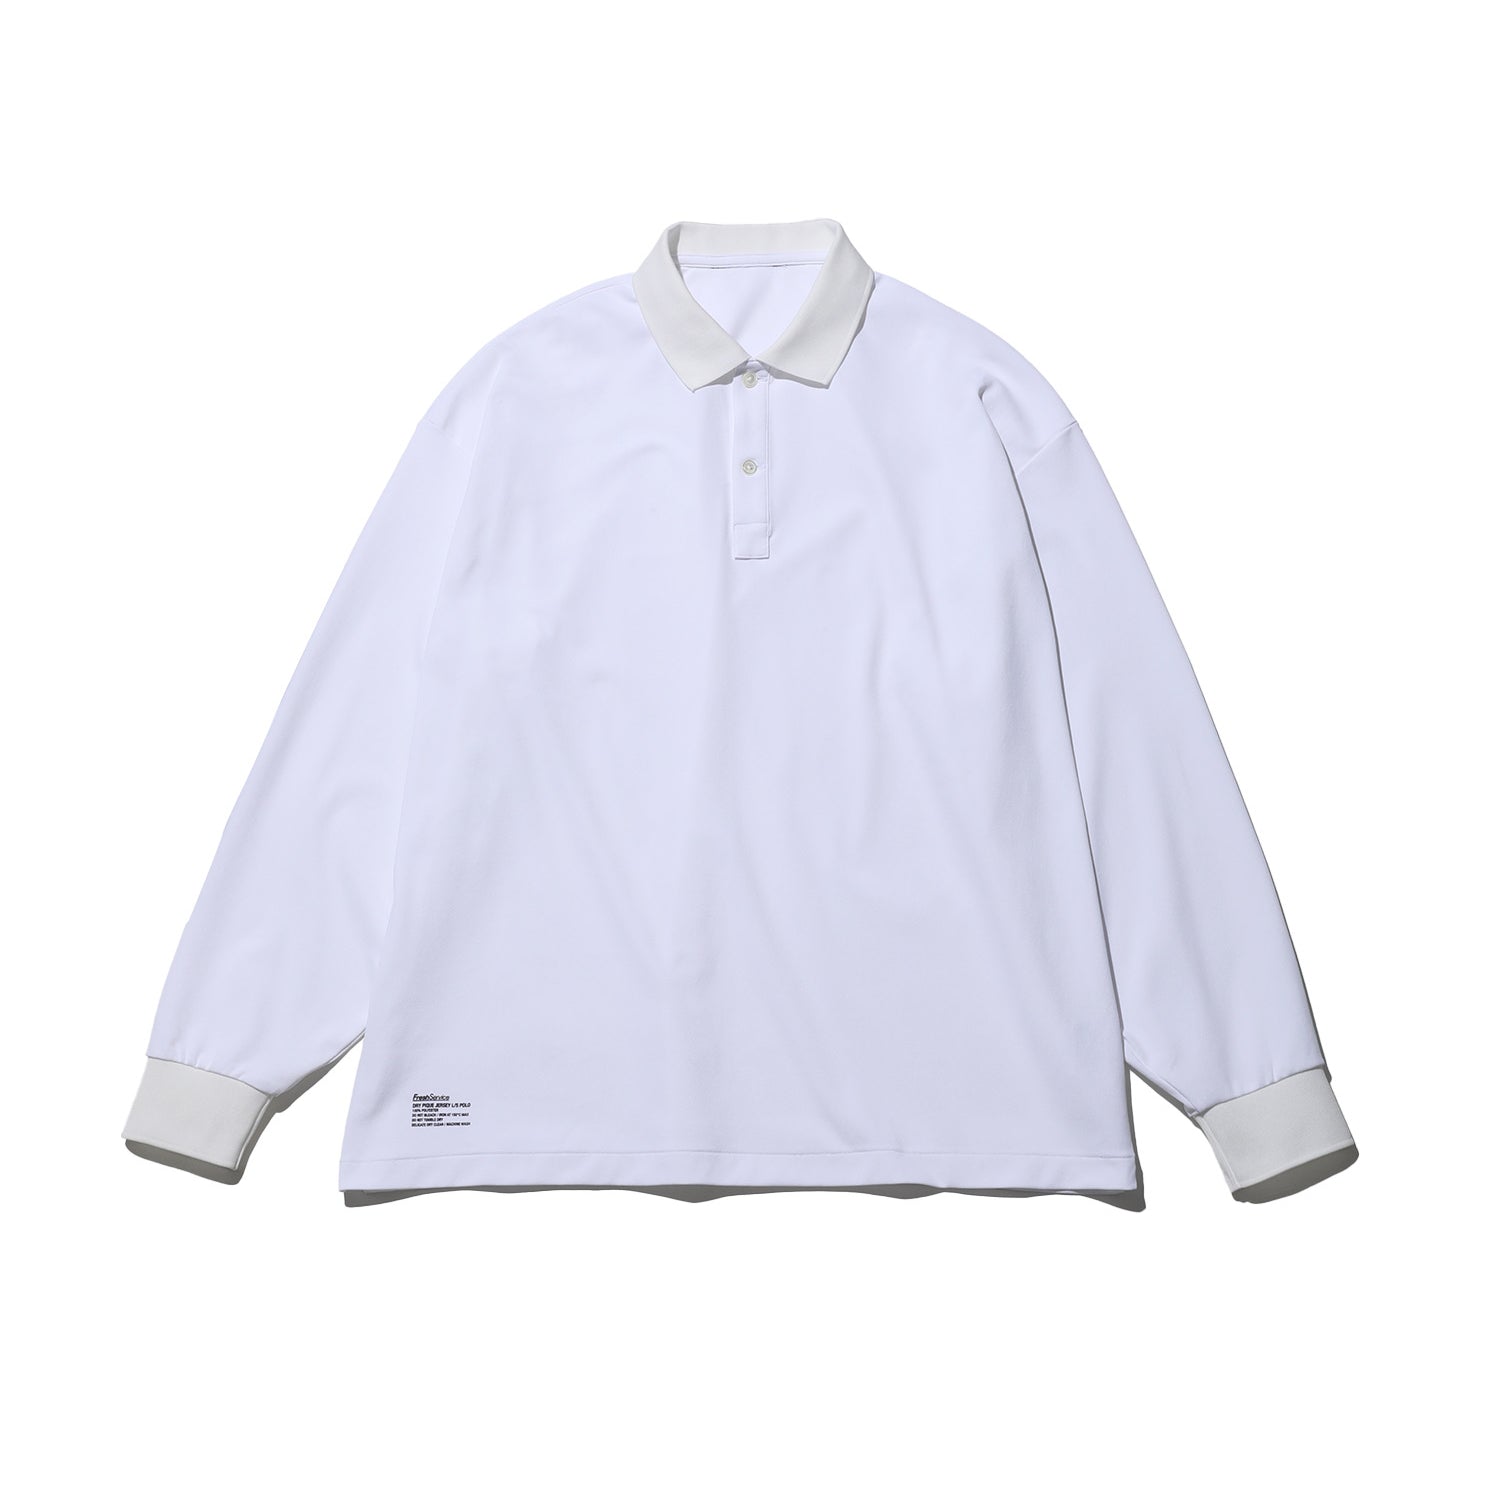 DRY PIQUE JERSEY L/S POLO